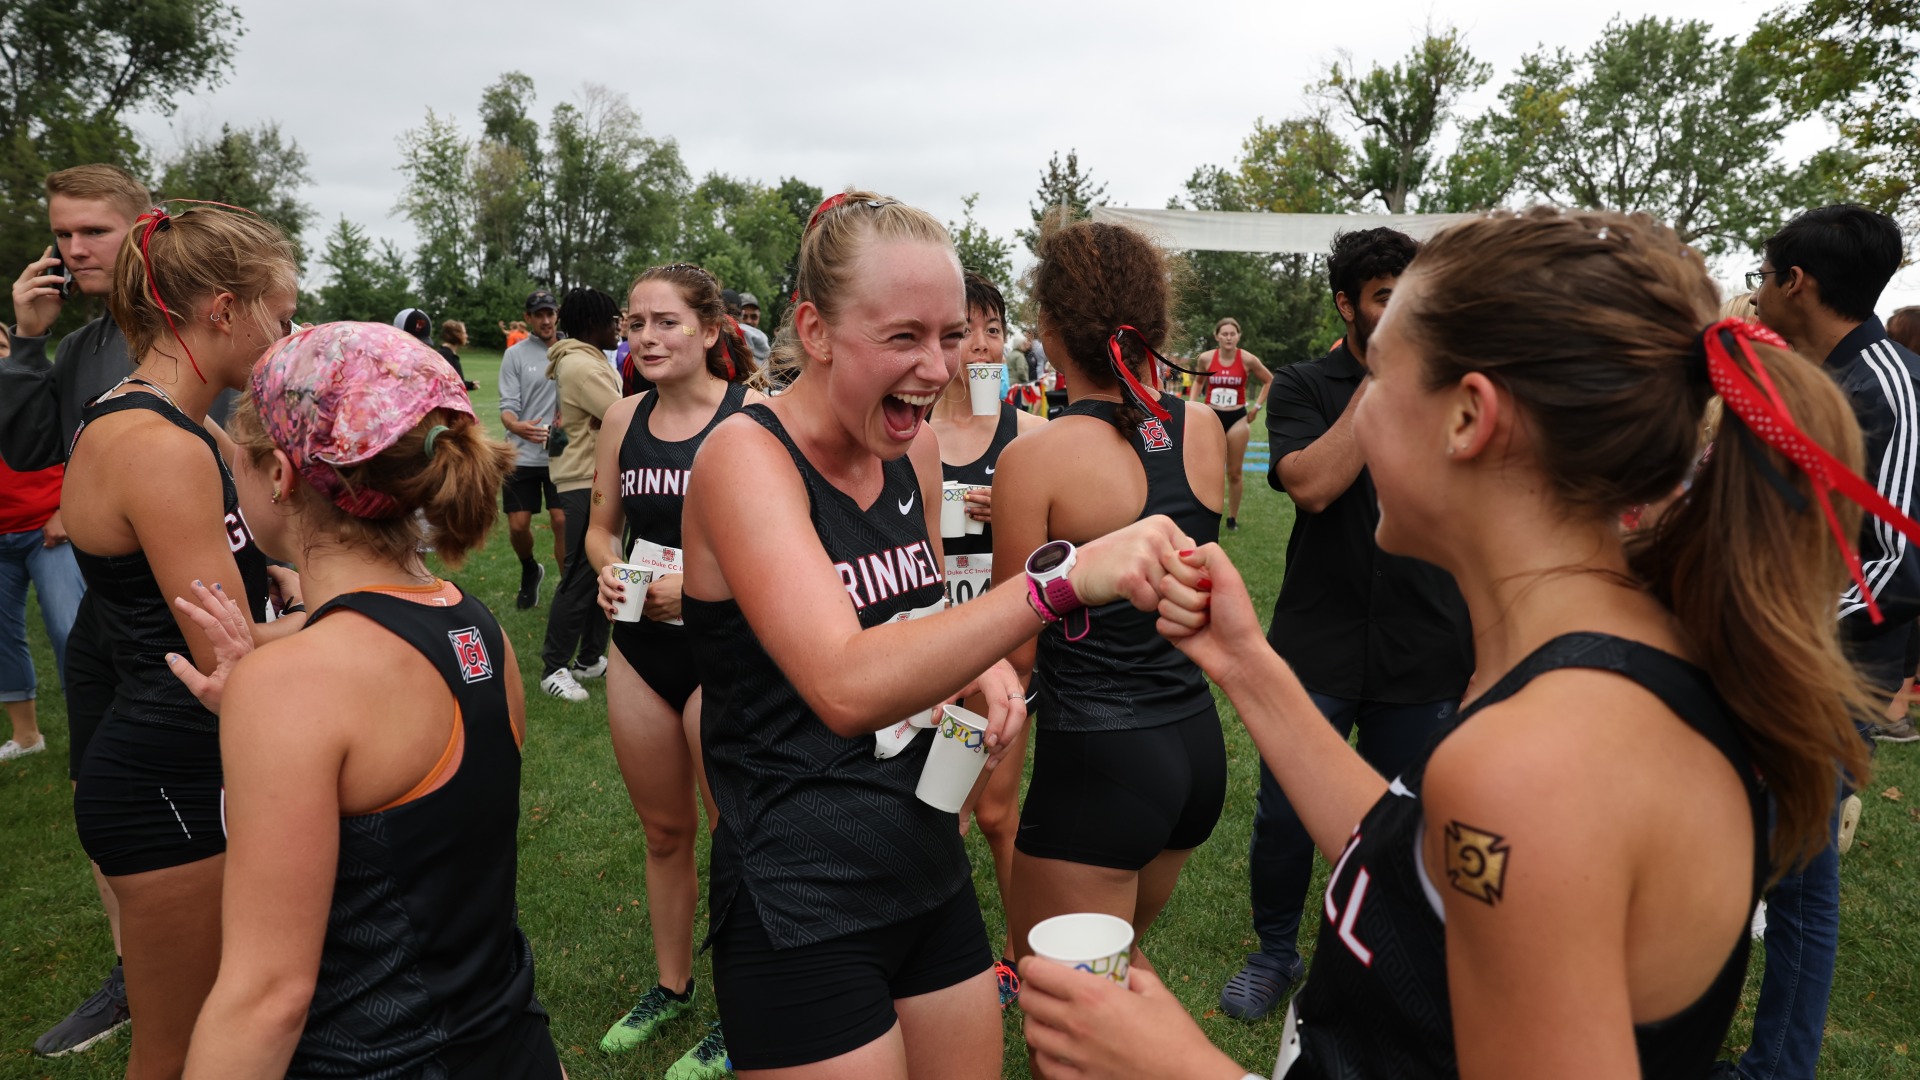 I fist bump my teammate affectionately after Les Duke home XC meet